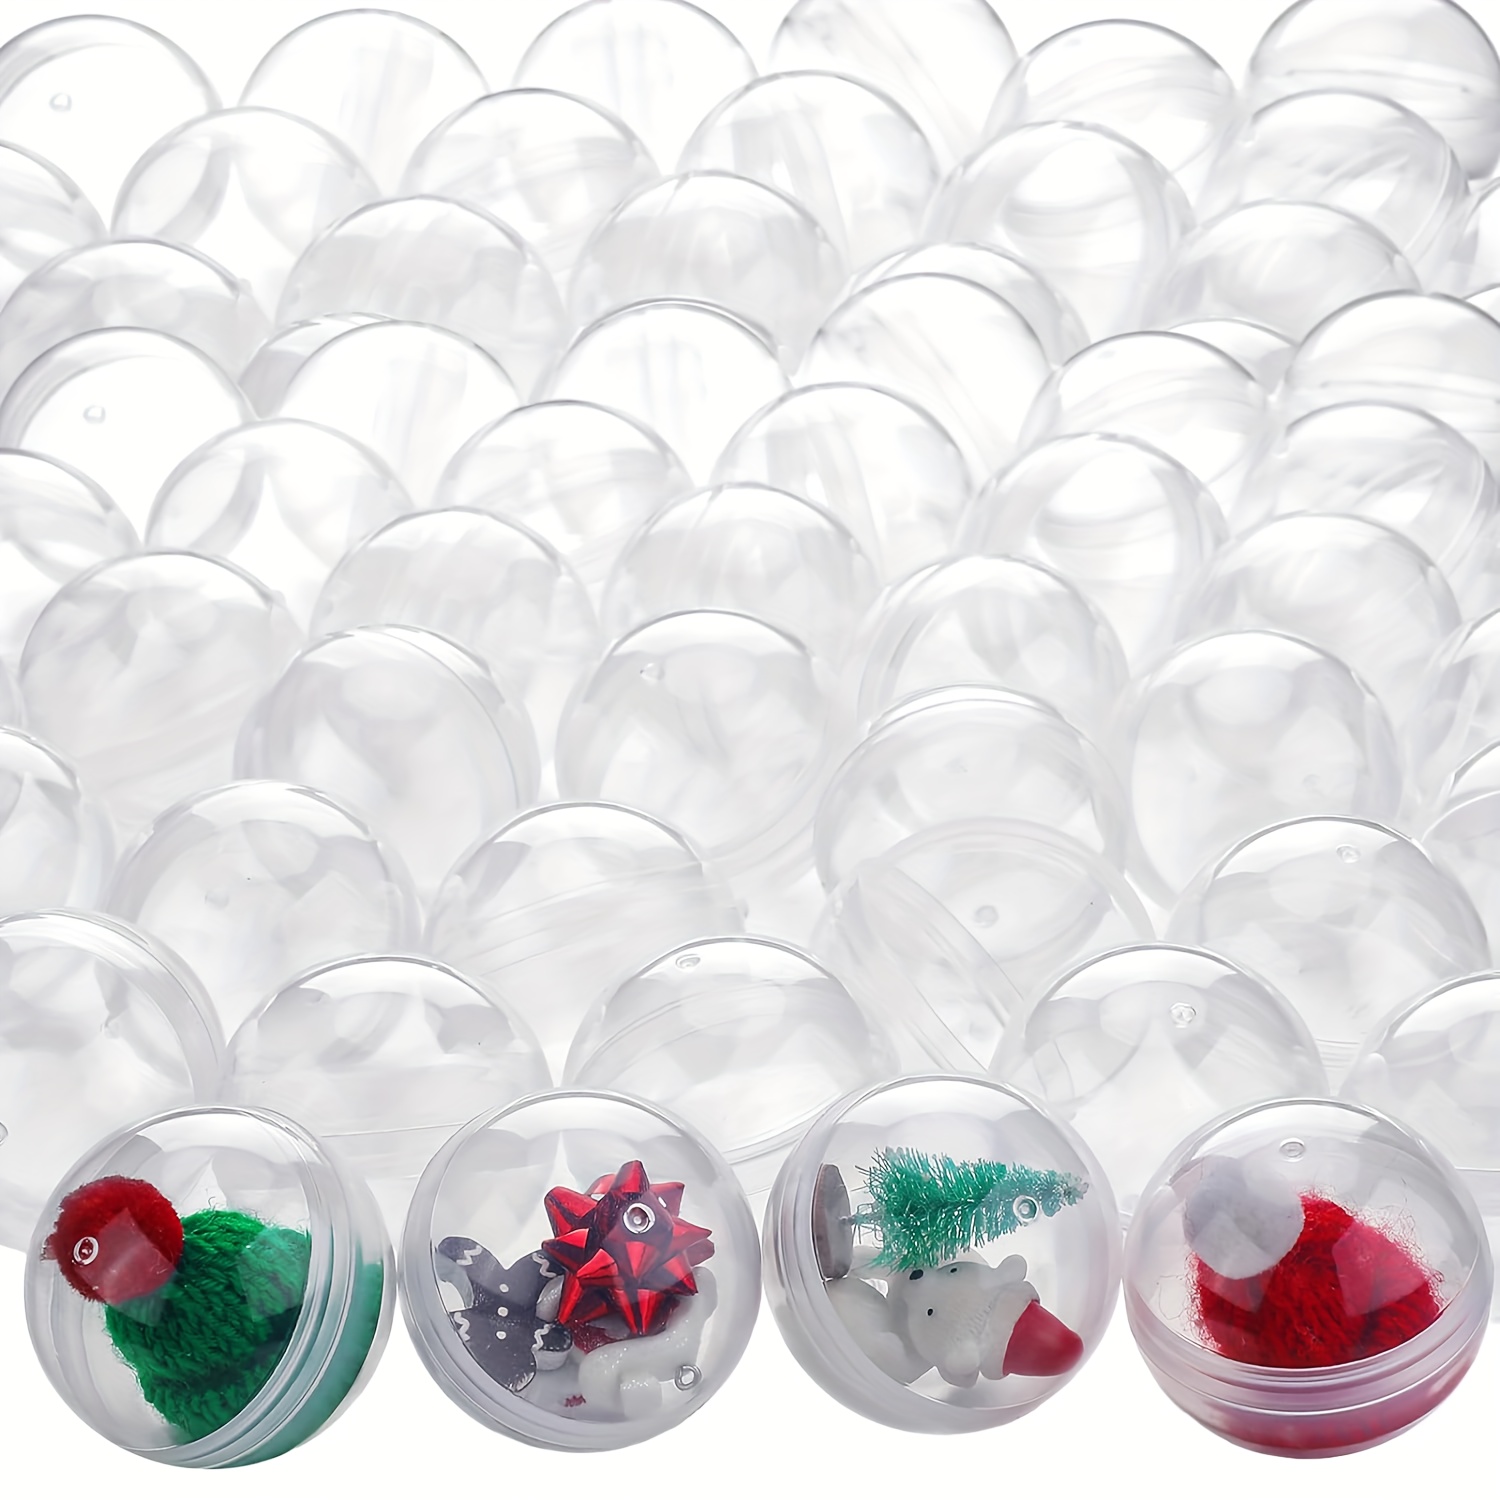 

Translucent Mini Capsule Set - 20/100/200pcs | 1.26" Empty Plastic Pods For Gumball Machines | Ideal For Party Favors, Prizes & Crafts